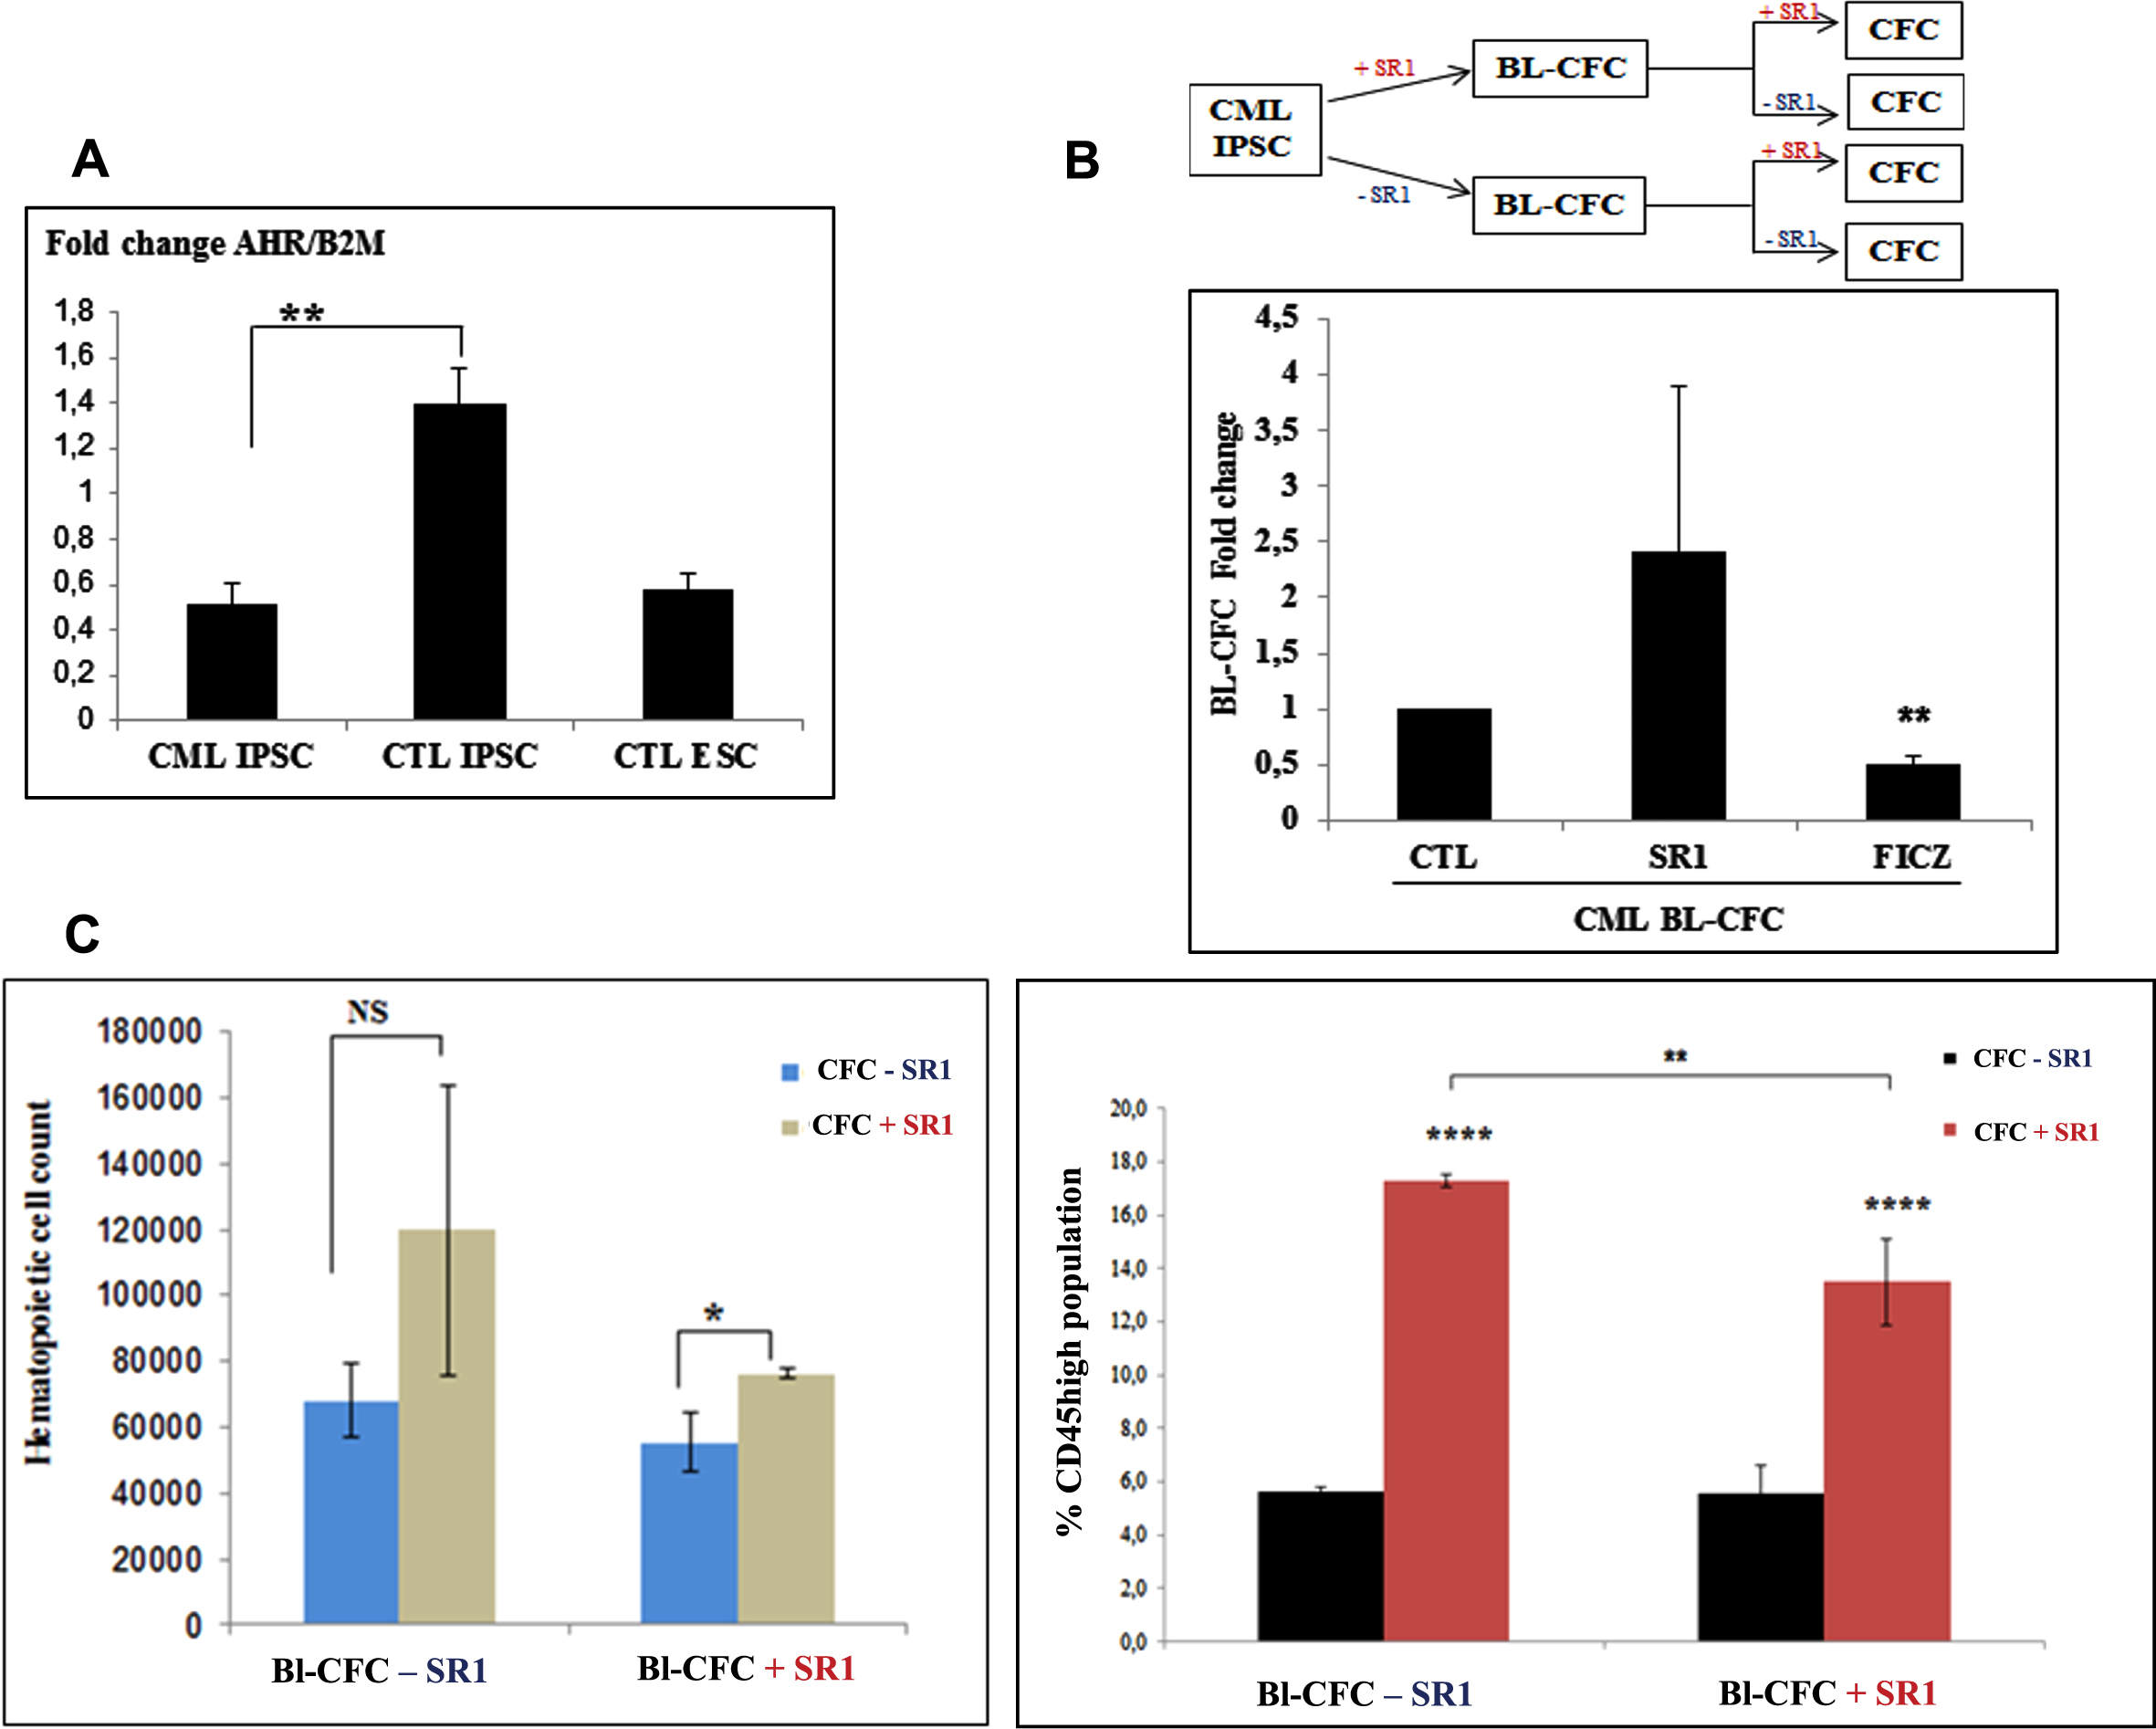 Modulation of hematopoietic potential by AHR signaling in CML iPSC-derived Bl-CFC. (A) AHR gene expression levels analyzed by qRT-PCR in CML IPSC as compared to iPSC from normal donor (PB33, CTL IPSC) and human ESC line H1. (B) Schematic representation of the experimental approach. Upper panel: iPSC were used to generate Bl-CFC in the presence or in the absence of AHR antagonist SR1 for 5 days. Bl-CFCs generated in either way were then used to generate hematopoietic cells in the presence or in the absence of SR1. The same experiments were then performed by the use of FICZ, which is the agonist of AHR. Lower panel: Evaluation of the effect of AHR antagonist SR1 or AHR agonist FICZ in the generation of CML Bl-CFC. (C) Impact of the AHR antagonist SR1 on the generation of CD45+ hematopoietic cells according to the presence or absence of SR1 during Bl-CFC cultures (see text).